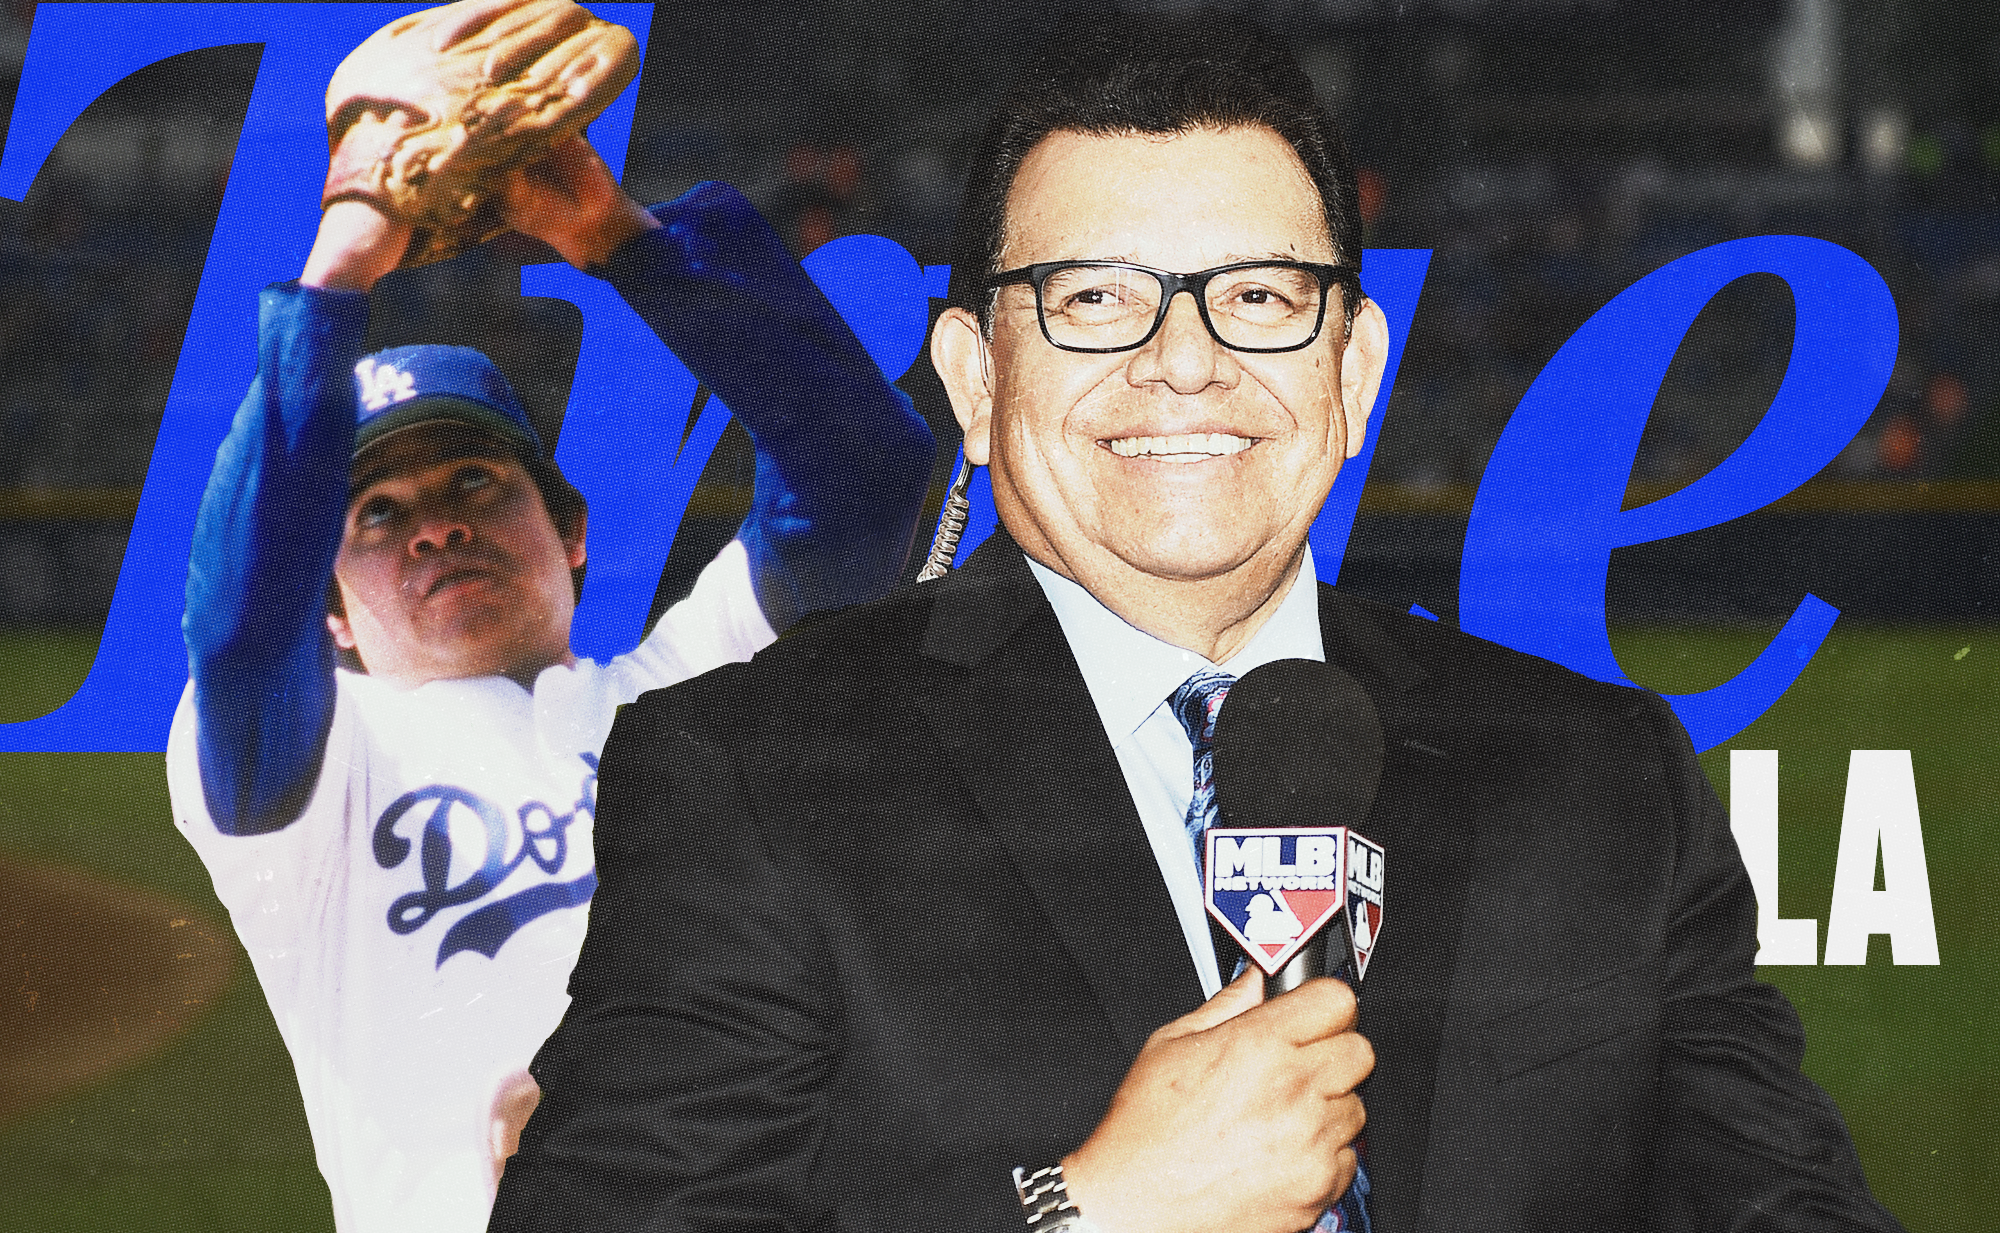 Fernando Valenzuela talked about his playing career, broadcasting, and influences in his life.